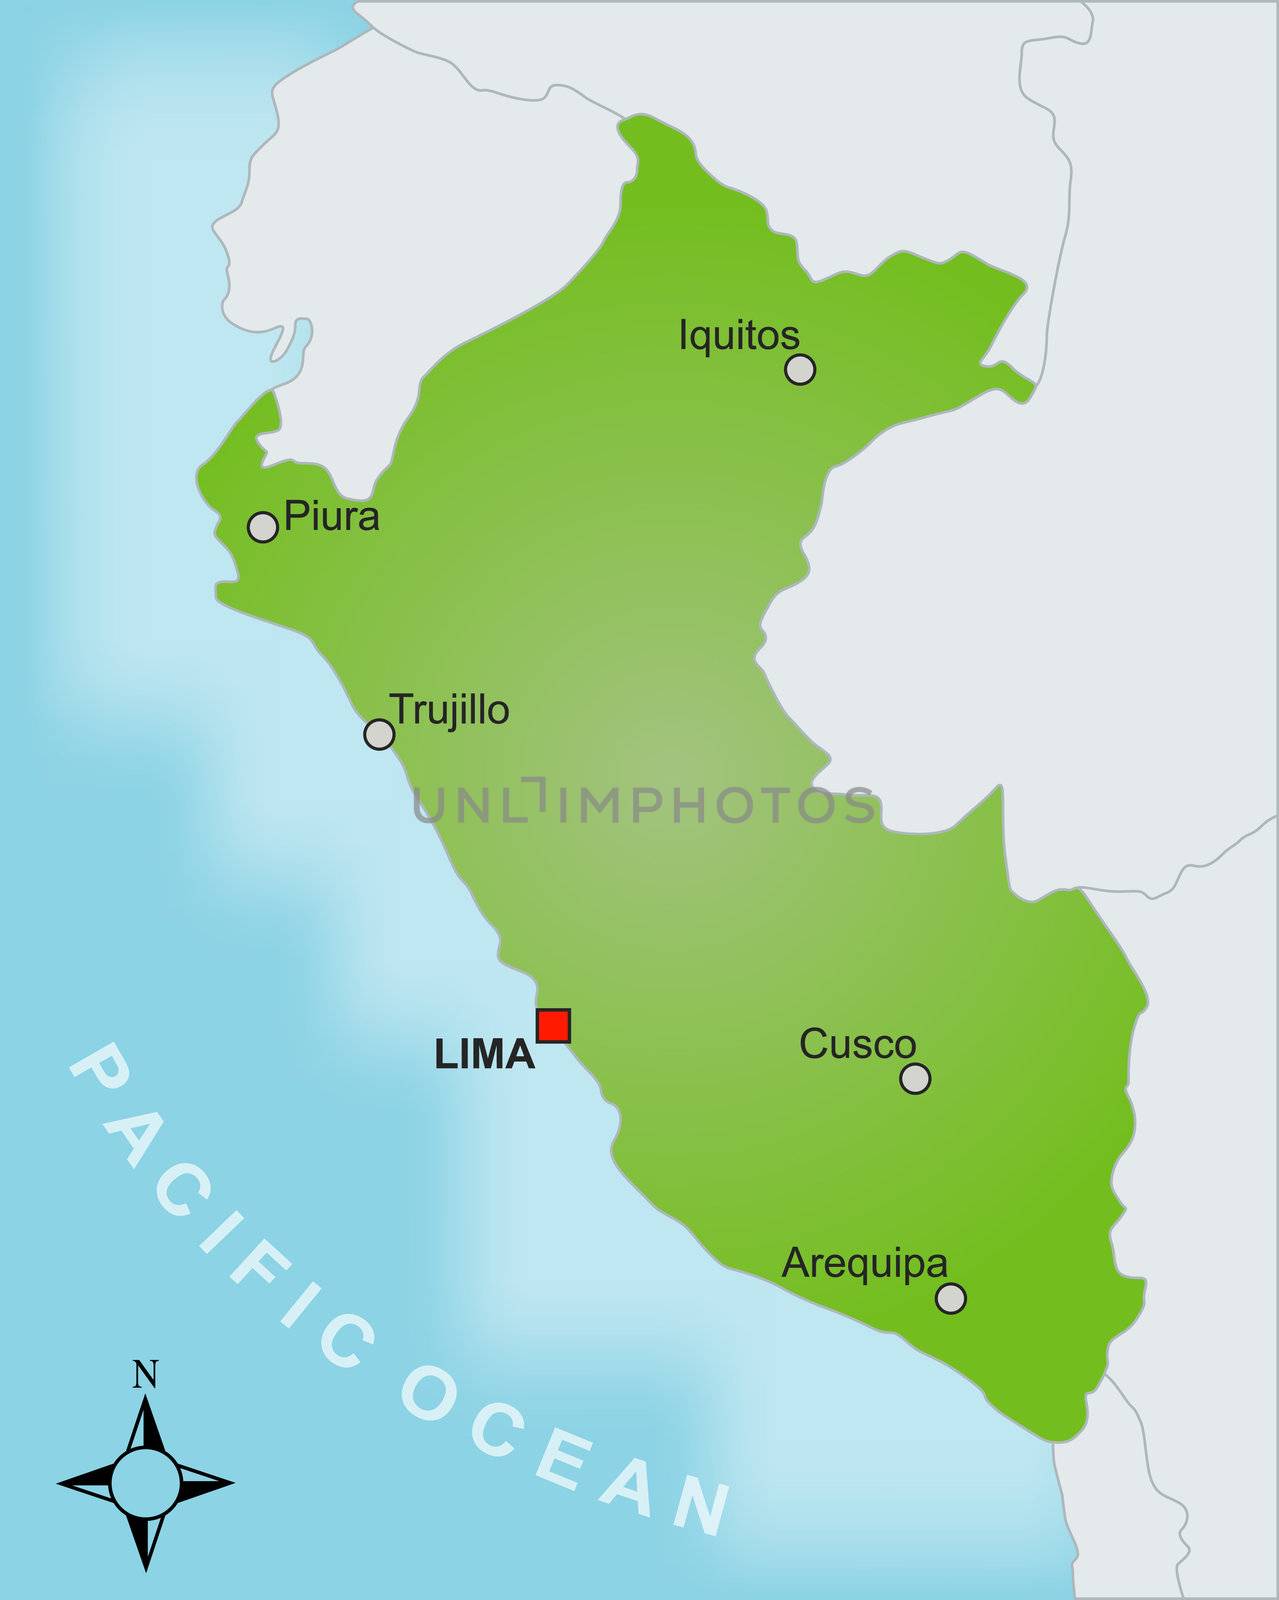 A stylized map of Peru showing different cities and nearby countries.